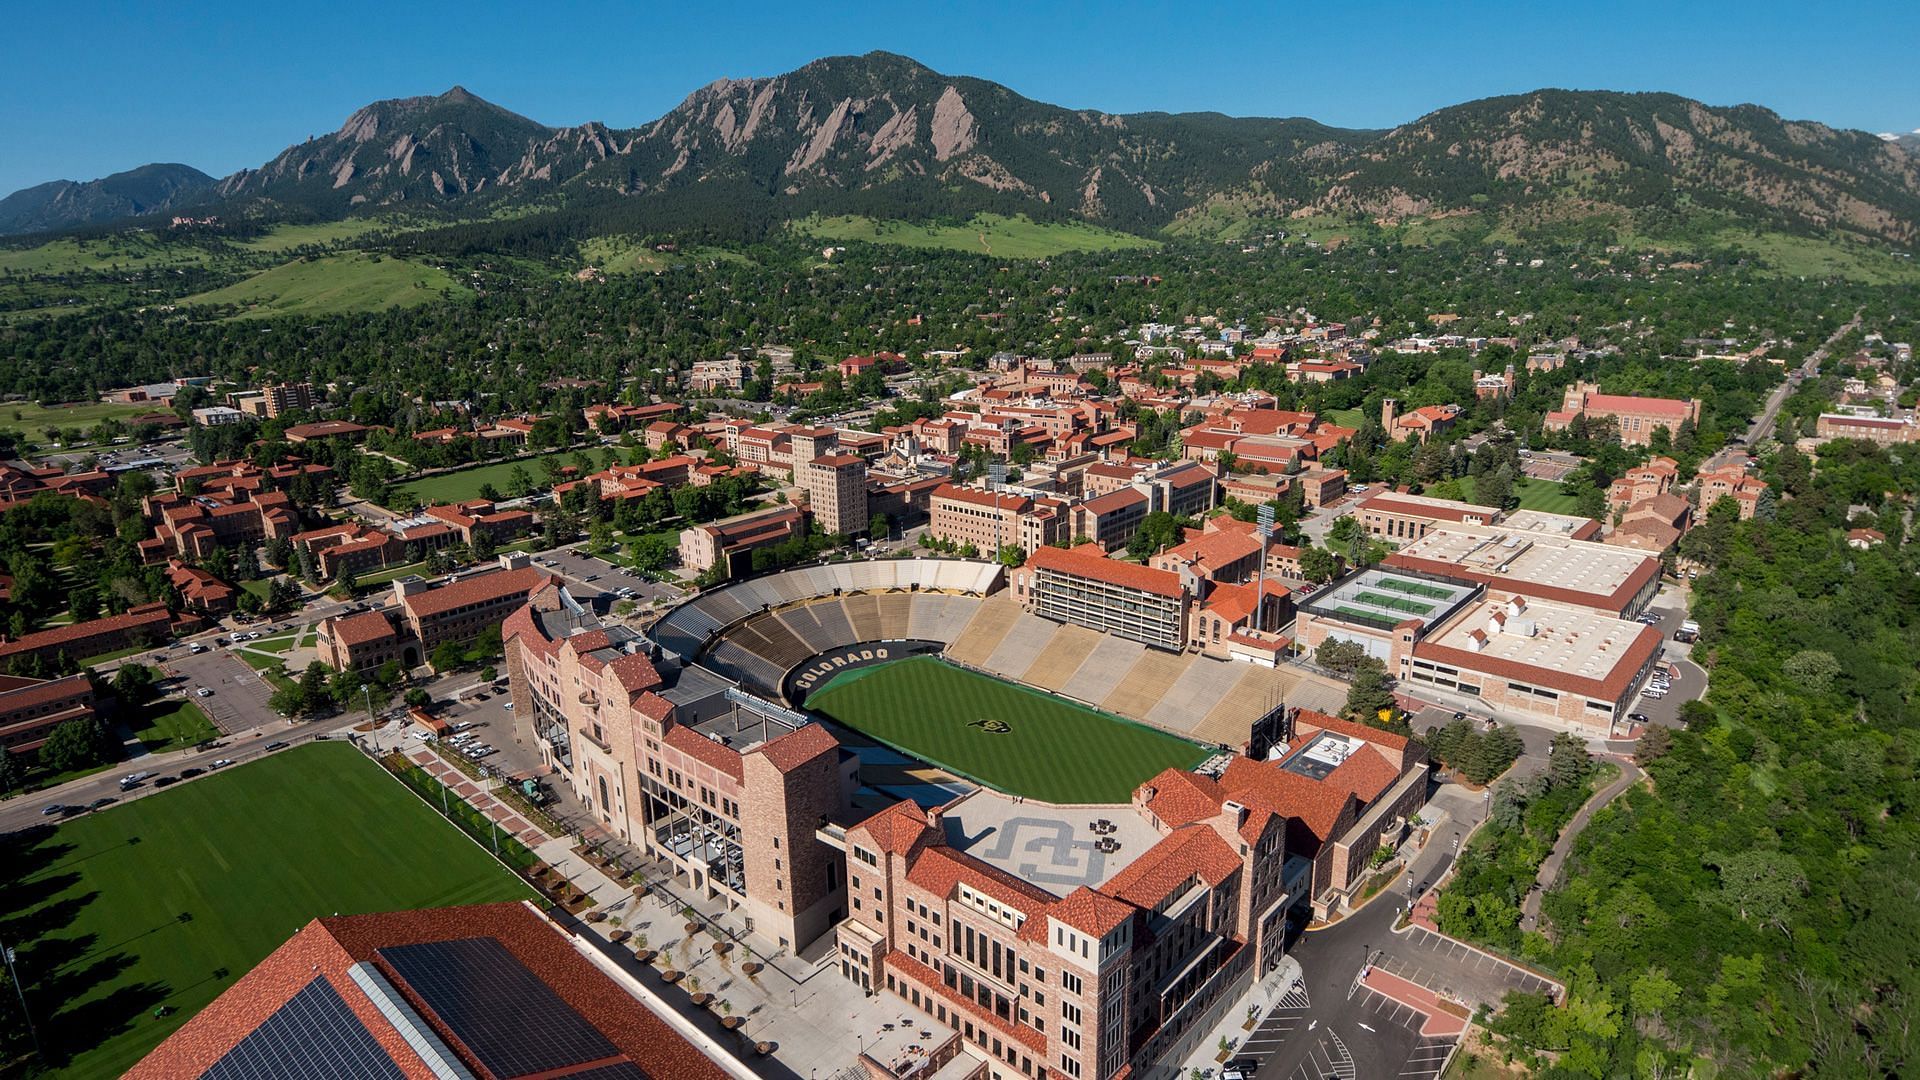 University of Colorado is rumored to be considering a move to the Big 12